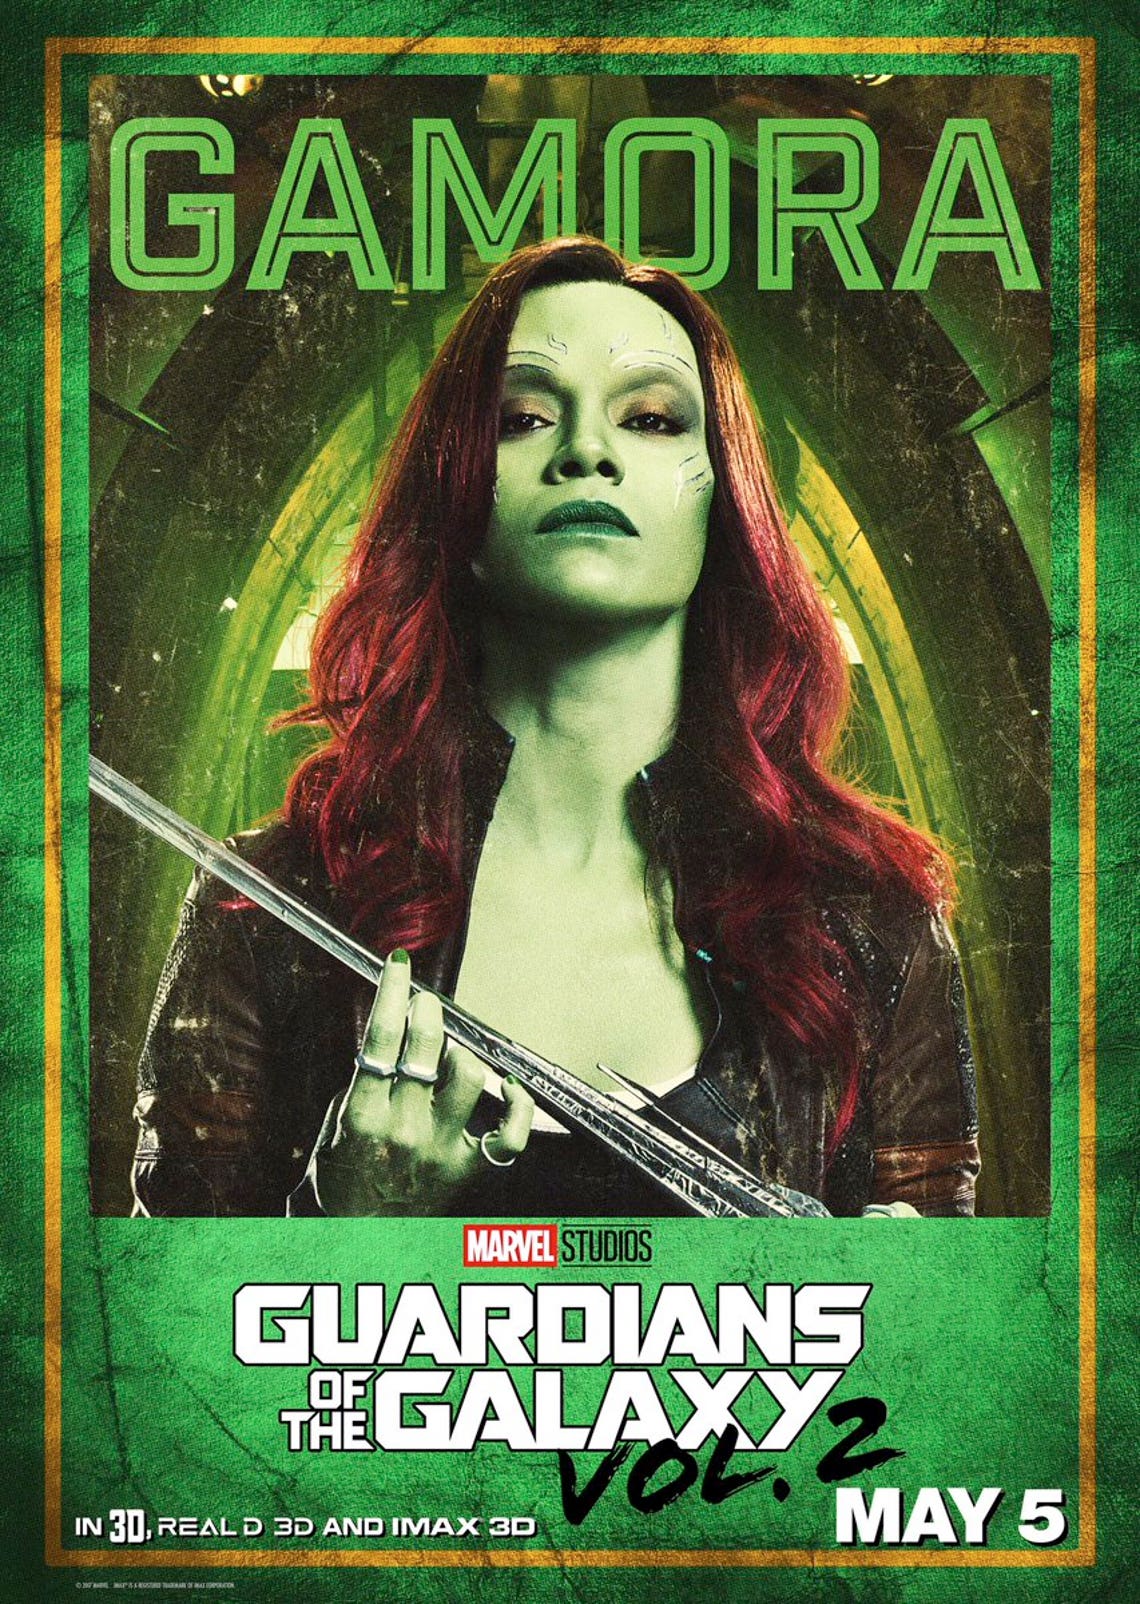 Guardians of the Galaxy 2' Character Posters Revealed